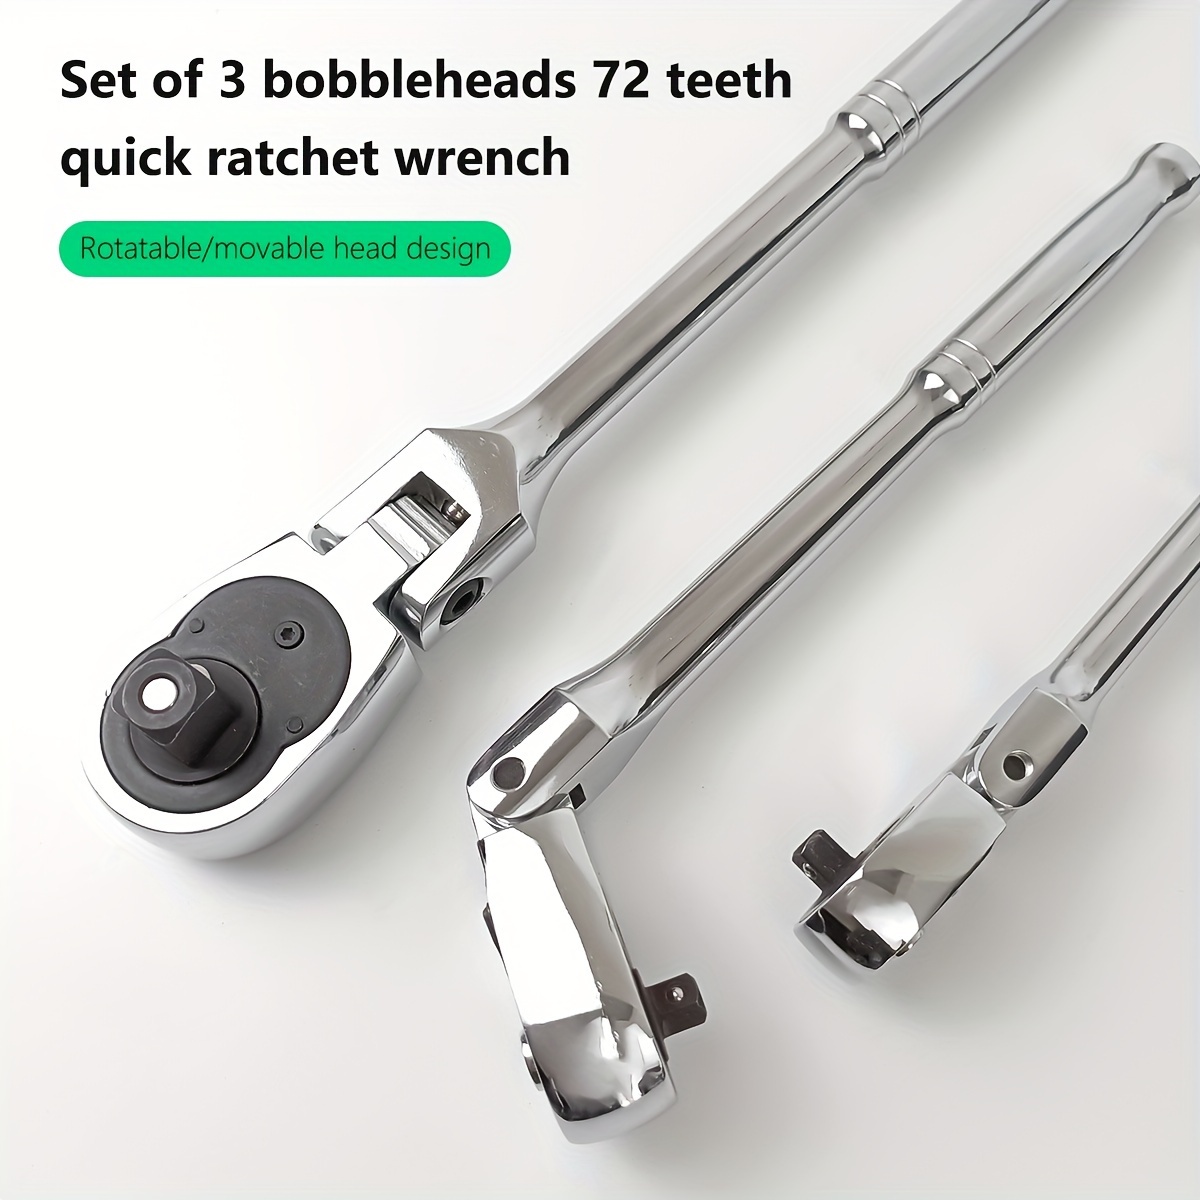 

3-piece Chrome Vanadium Steel Ratchet Wrench Set - Dual-purpose, 72 Teeth, Quick Release With Flexible Head For 180° Rotation - Ideal For Car, Bike & Home Repairs - Perfect Gift For Dad